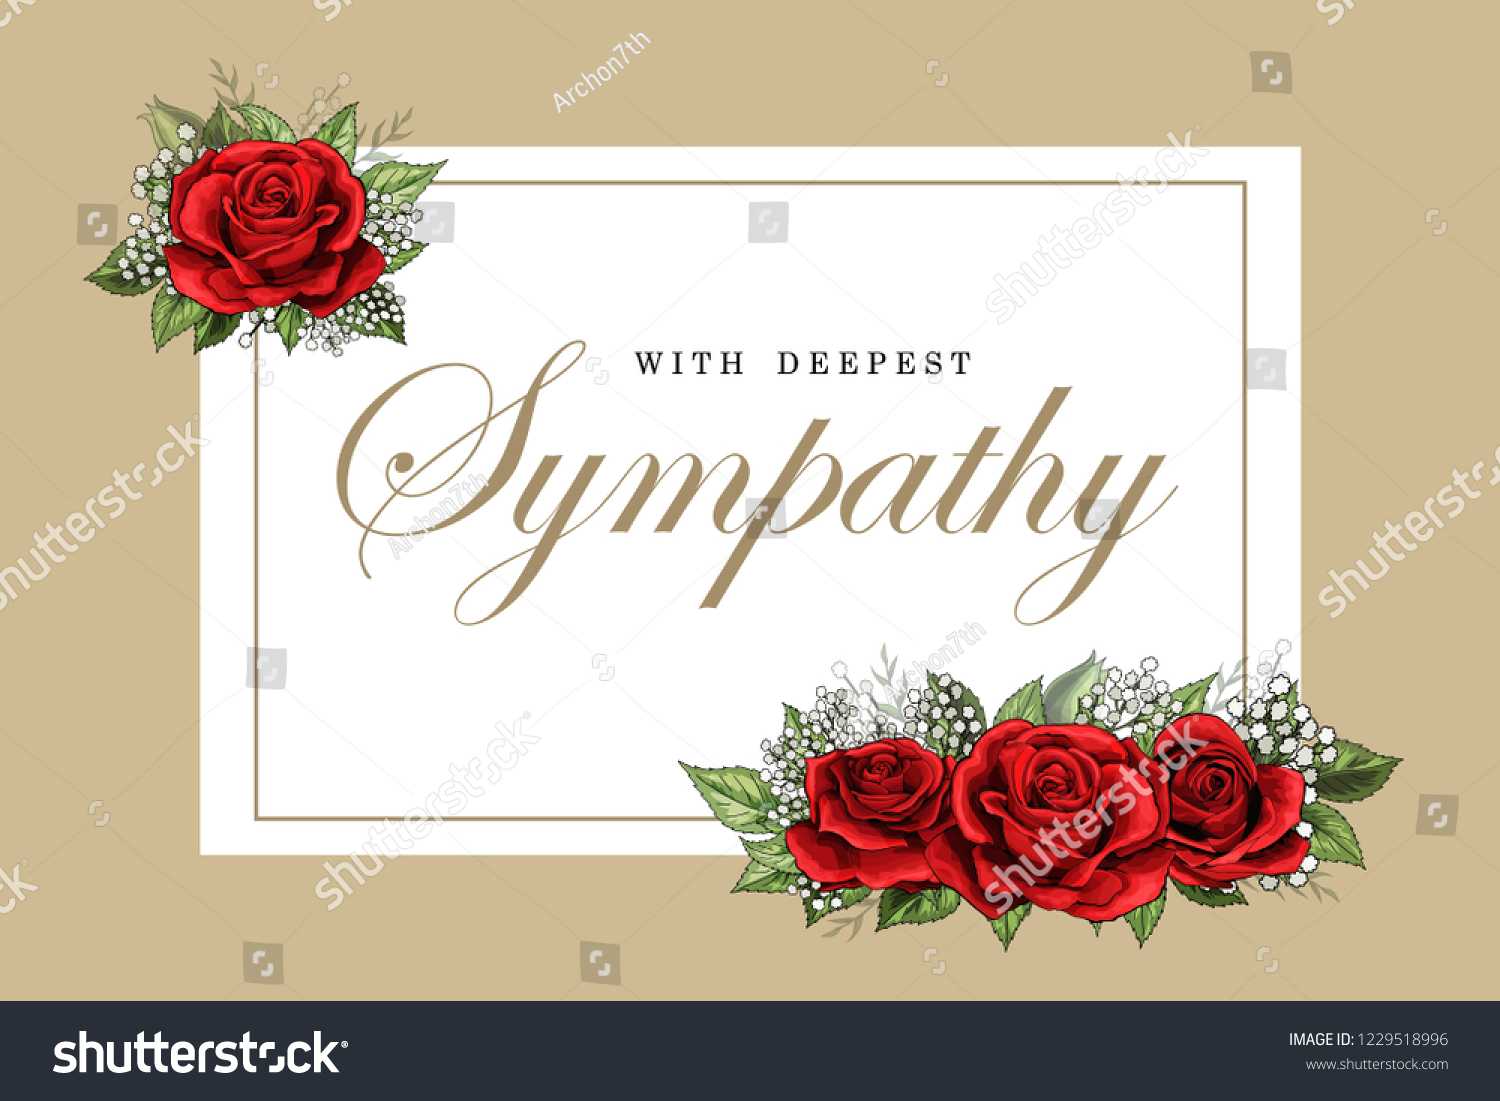 Condolences Sympathy Card Floral Red Roses Stock Vector Pertaining To Sorry For Your Loss Card Template